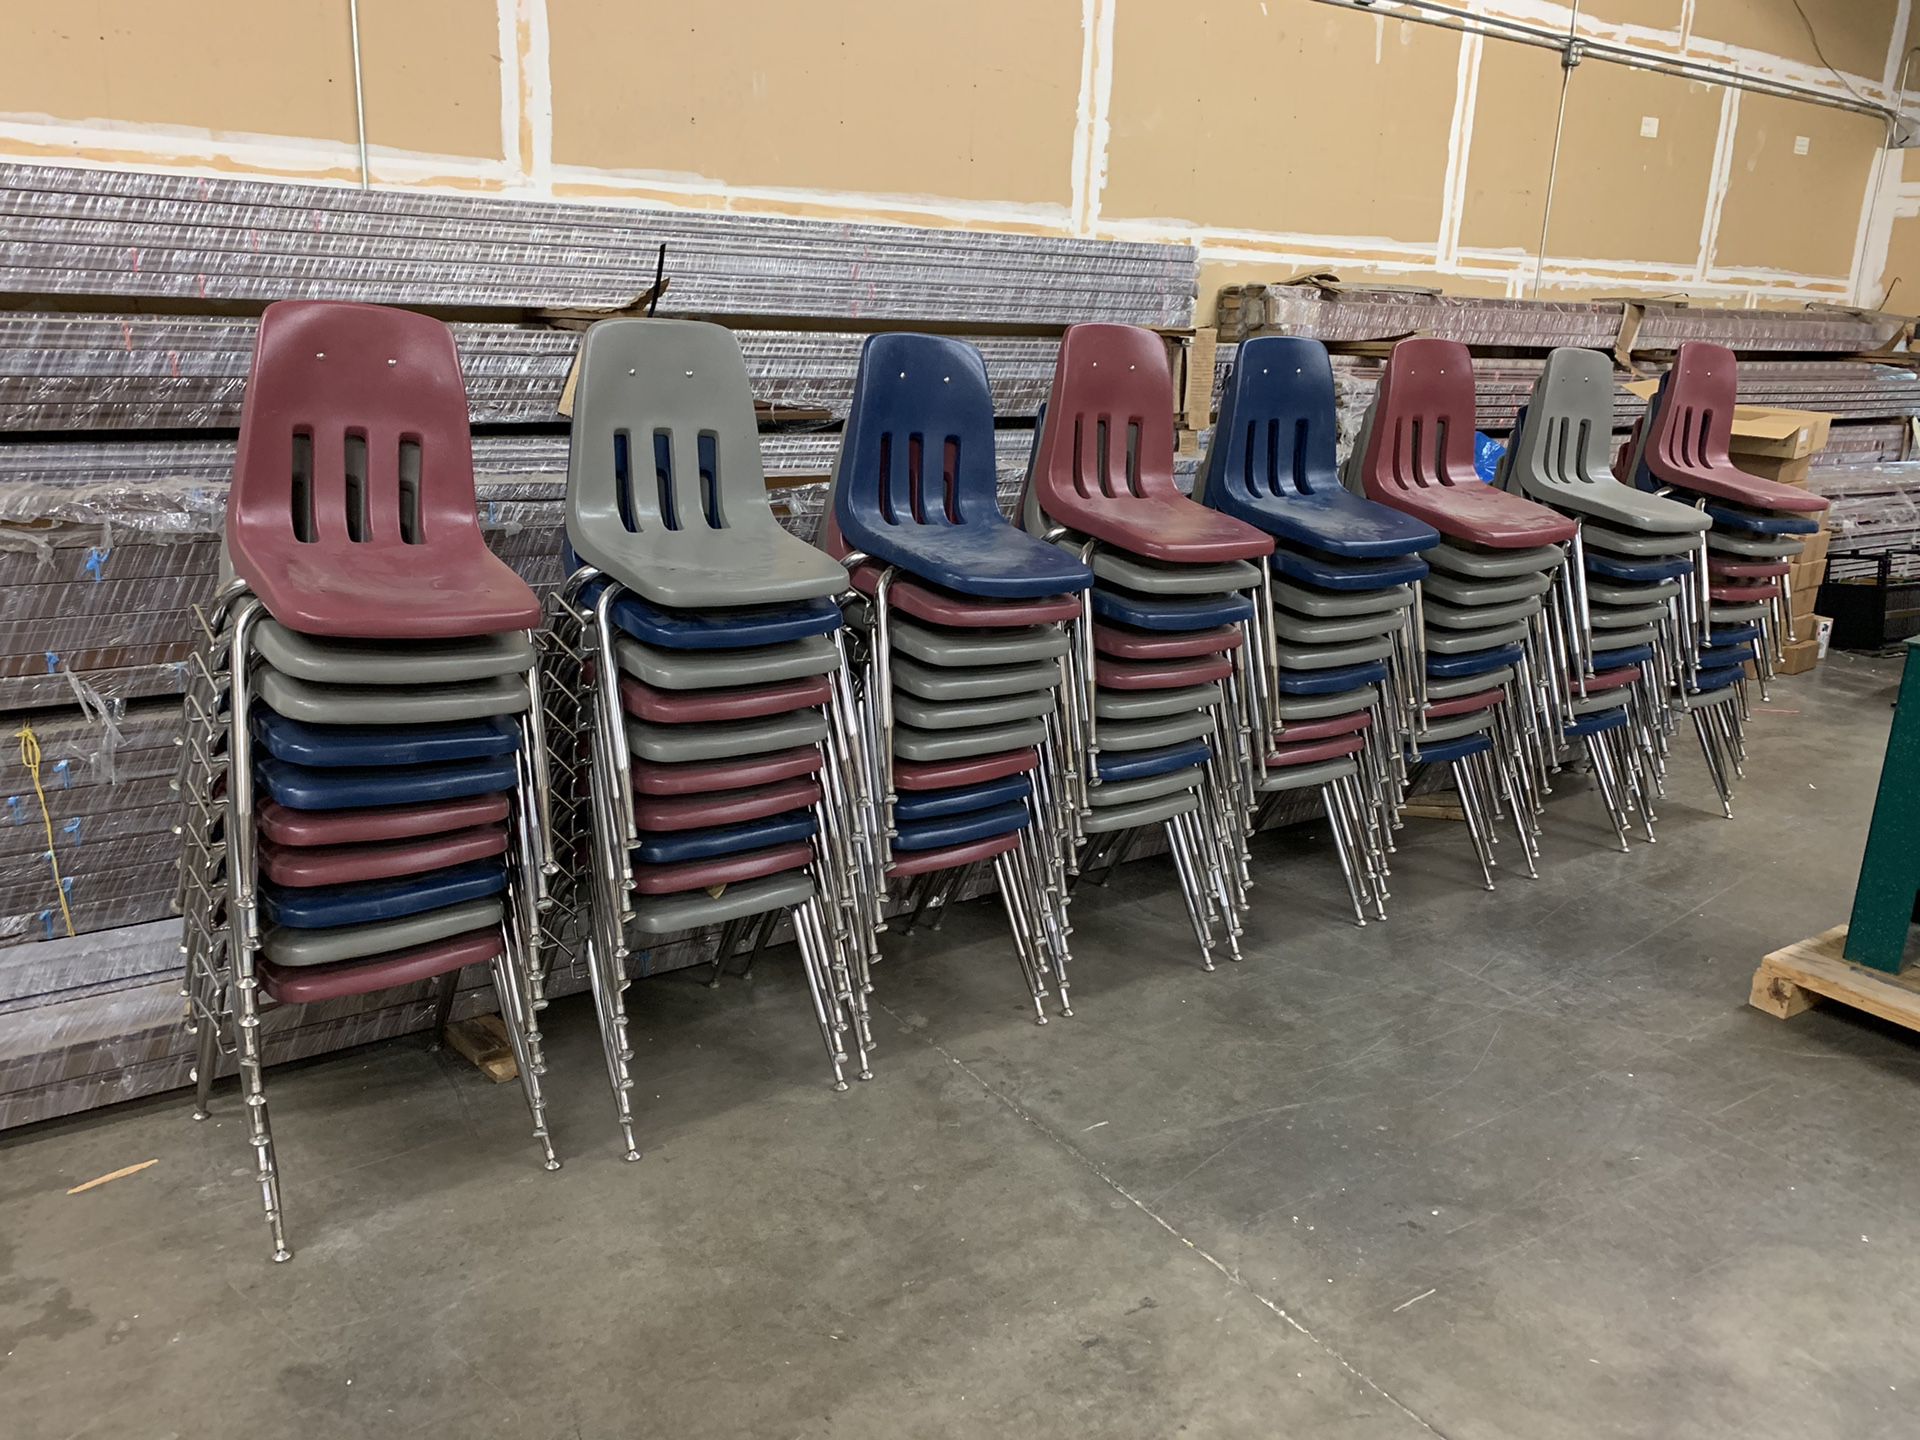 Virco stackable, interlocking chairs - assorted colors